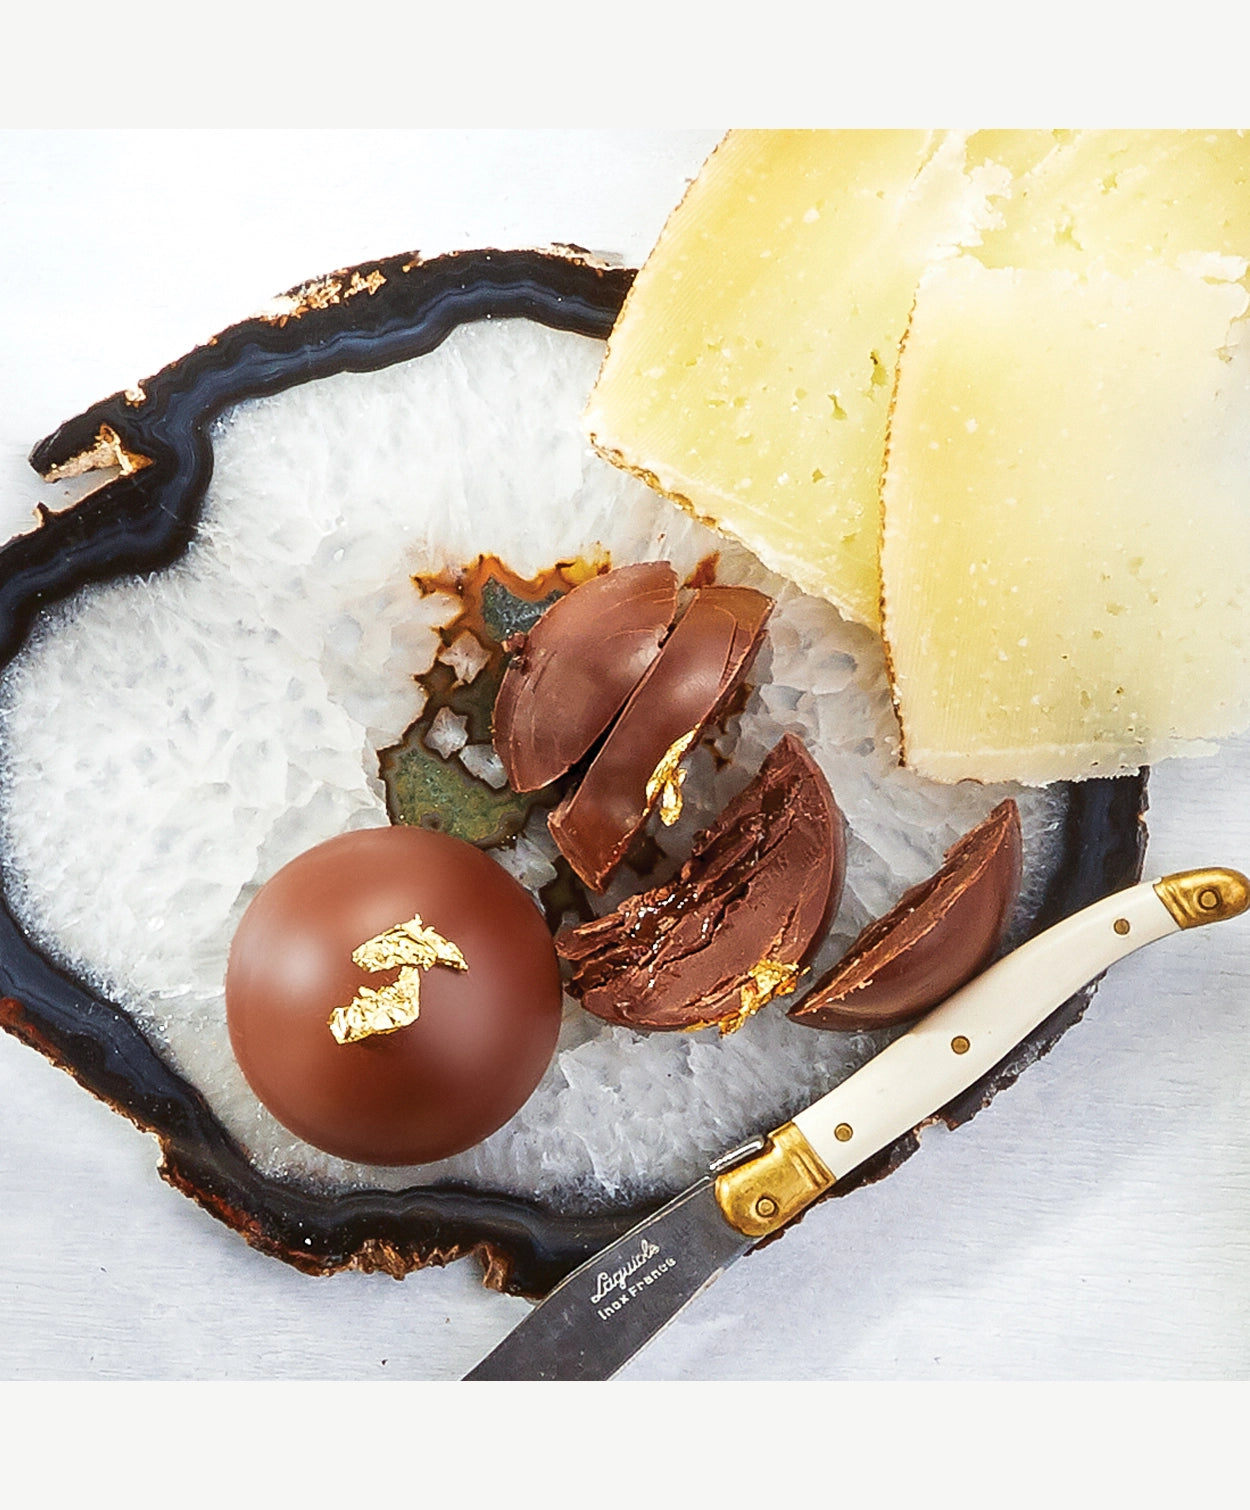 Two Vosges bombalina la bombe chocolate Reishi hazelnut ganache truffles topped in gold leaf sit atop a crystal geode beside a serving knife and two slices of cheese on a white background.